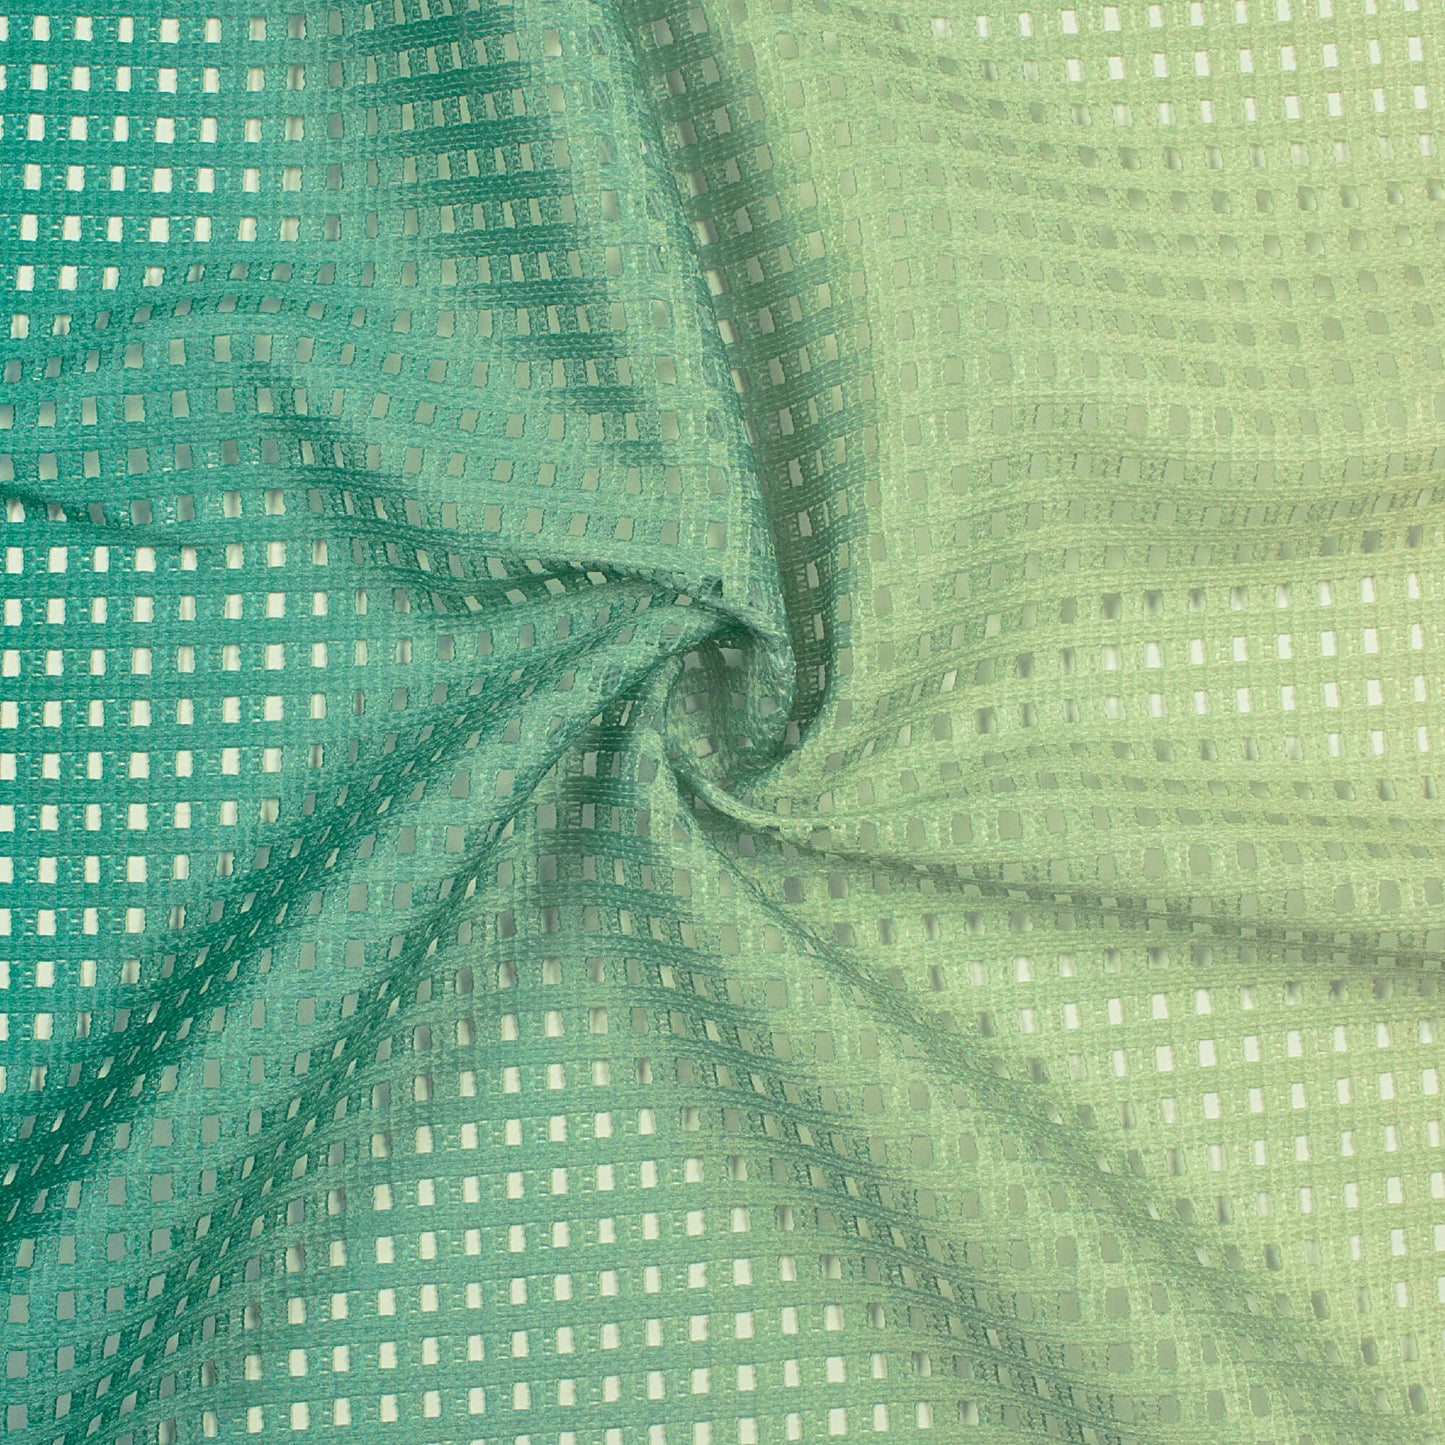 Swamp Green And Blue Ombre Pattern Digital Print Checks Raschel Net Fabric (Width 58 Inches)